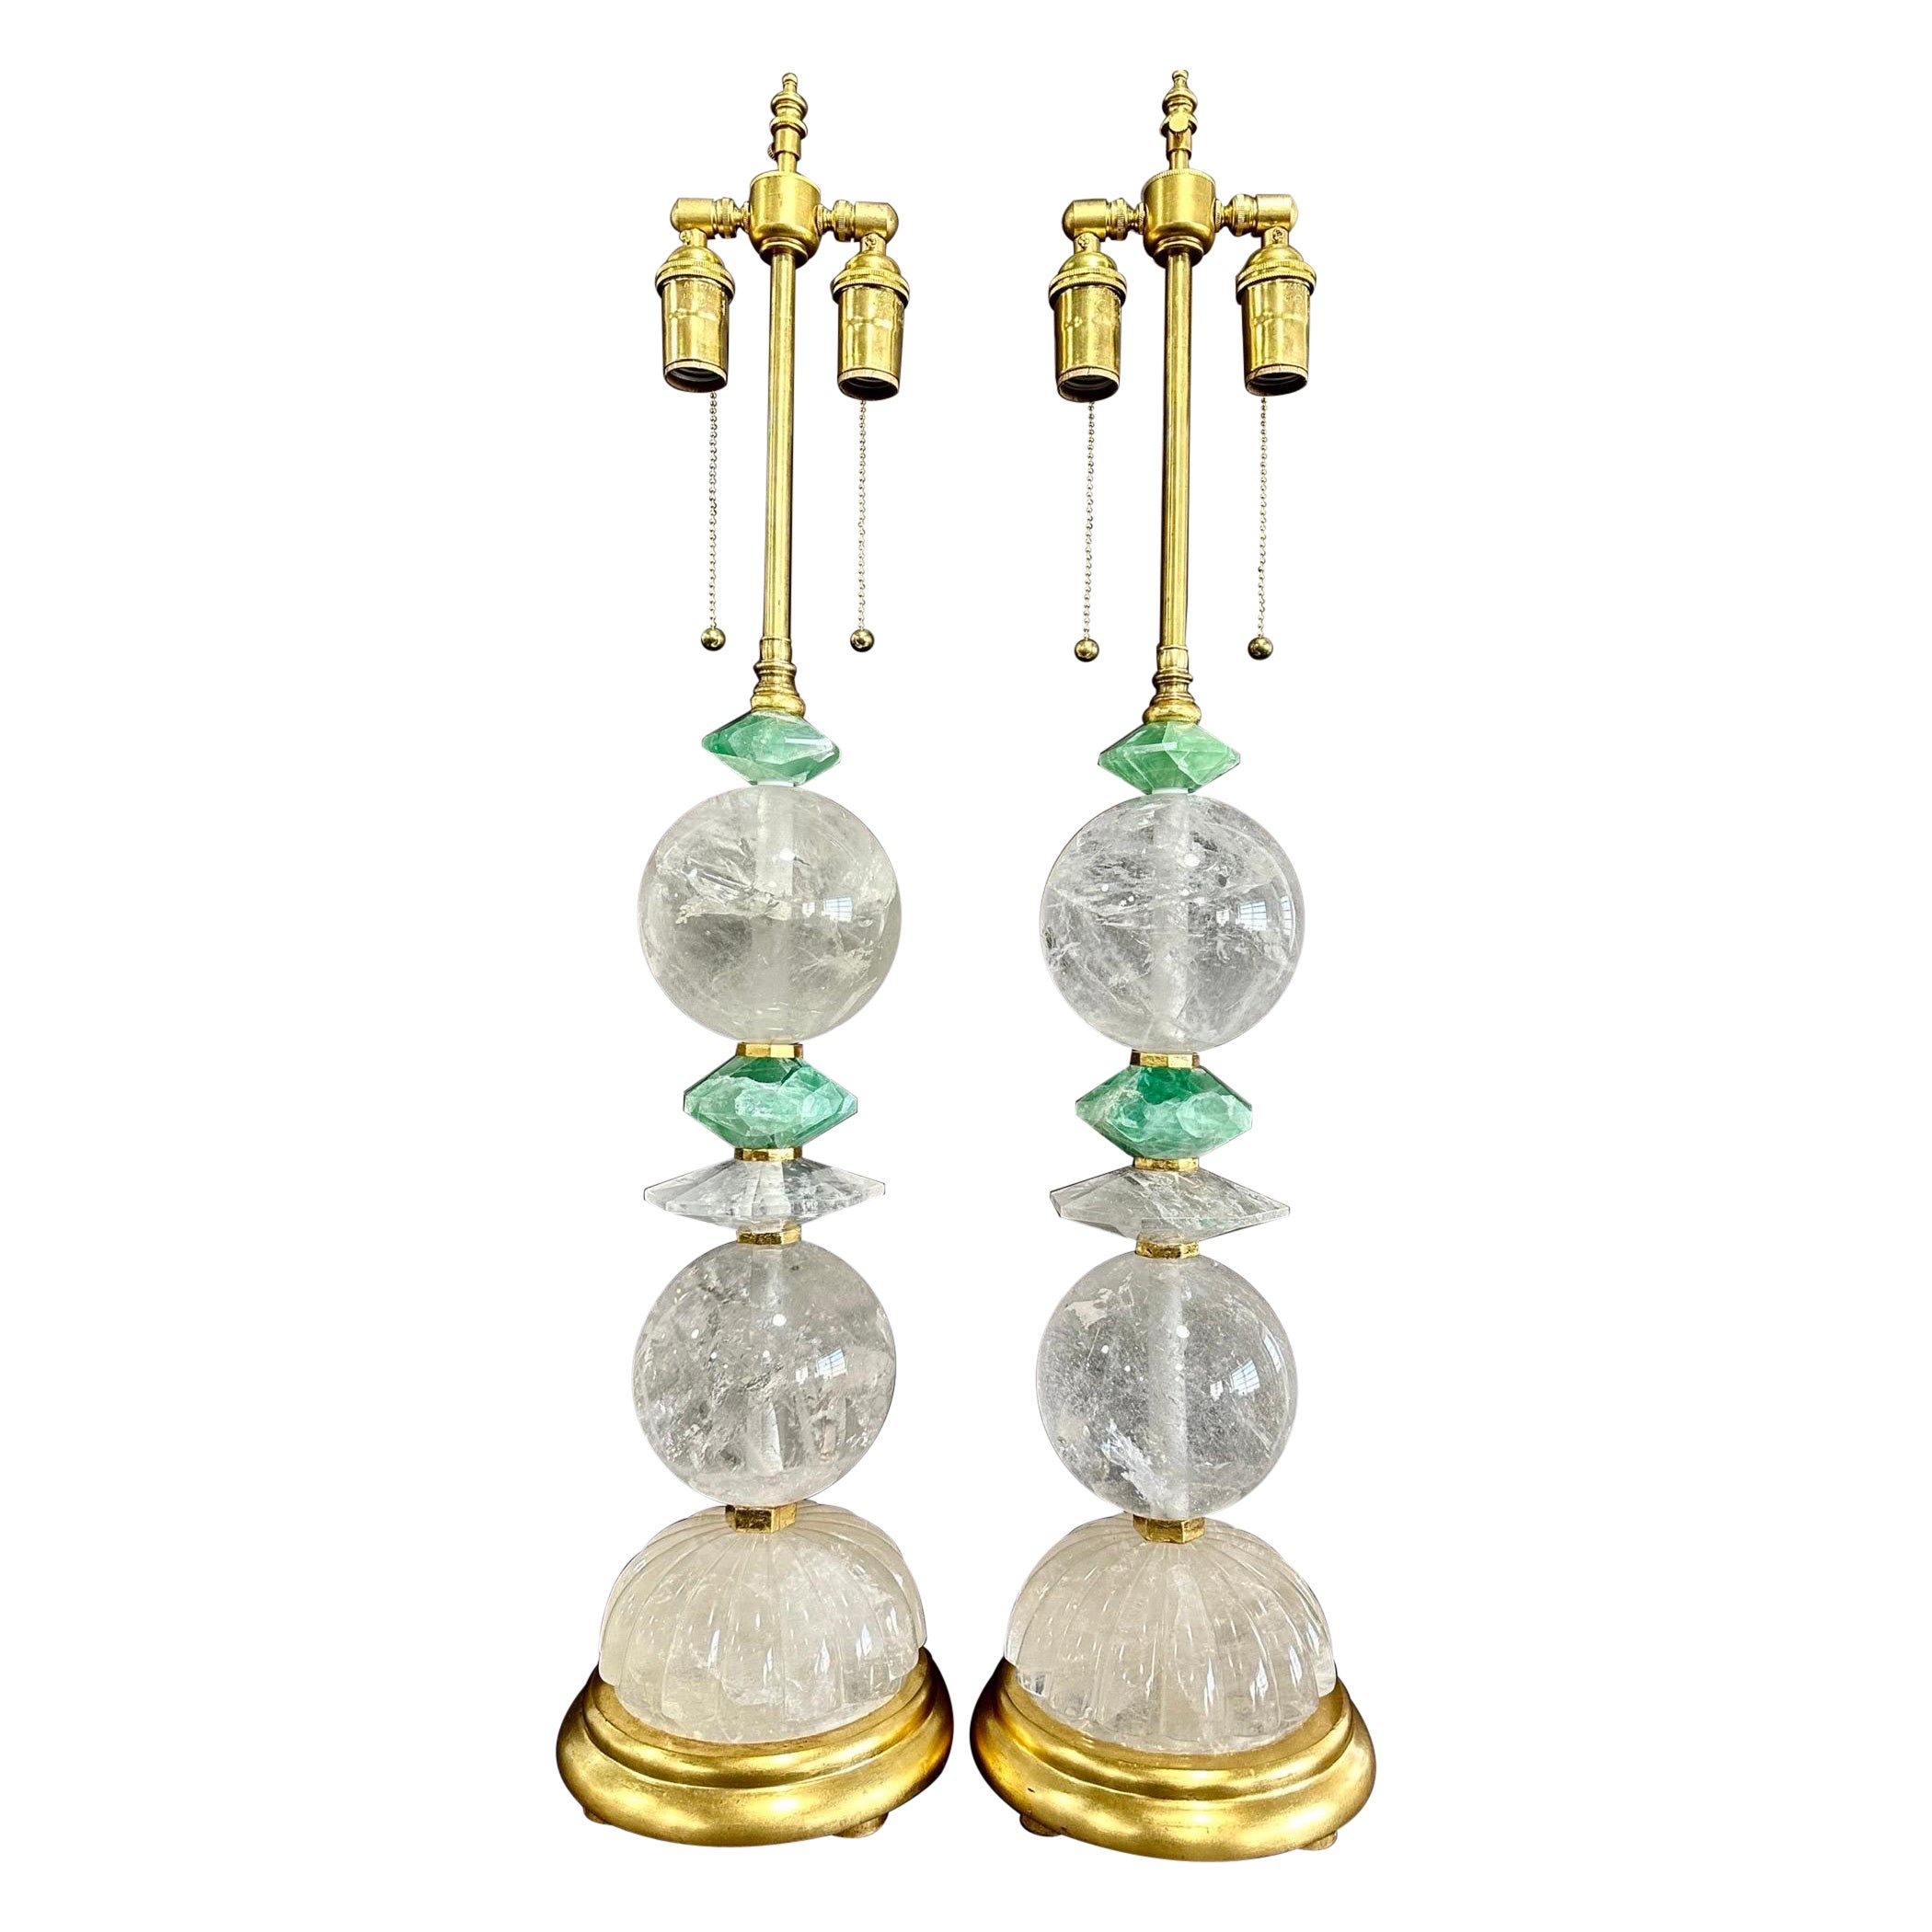 Wonderful Pair Mid Century Modern Style Rock Crystal Green Quartz Gold Lamps For Sale